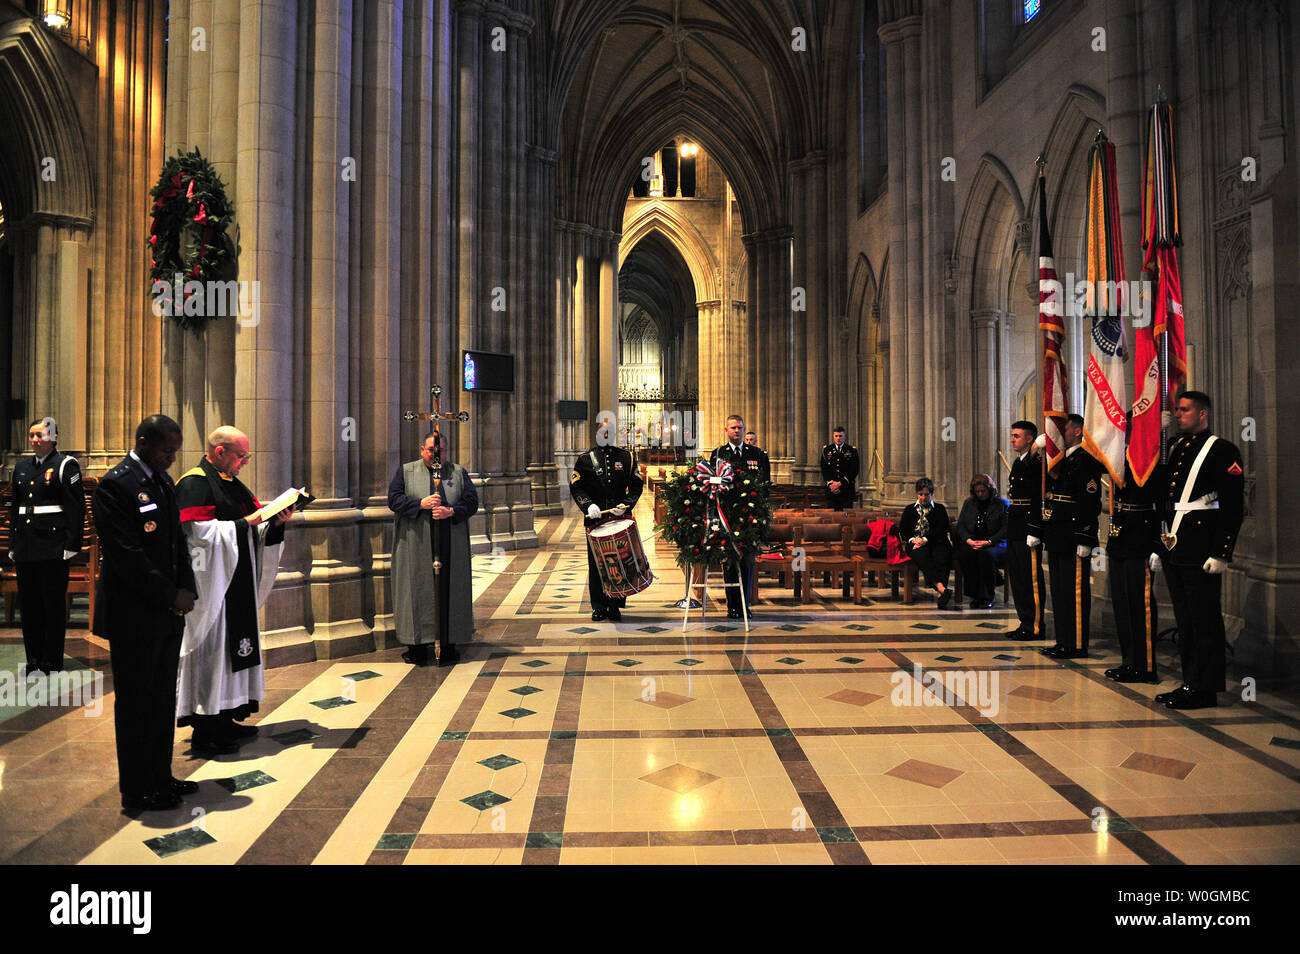 Rev. Richard Kukowski (2nd-L), Cathedral Chaplin, and Air Force Major General Darren W. McDew (L), Commander of the Air Force District of Washington, participates in a Wreath Laying Ceremony with members of an Army Honor Guard for the 156 anniversary of President Woodrow Wilson birth at his tomb at the Washington National Cathedral in Washington on December 28, 2011. UPI/Kevin Dietsch Stock Photo